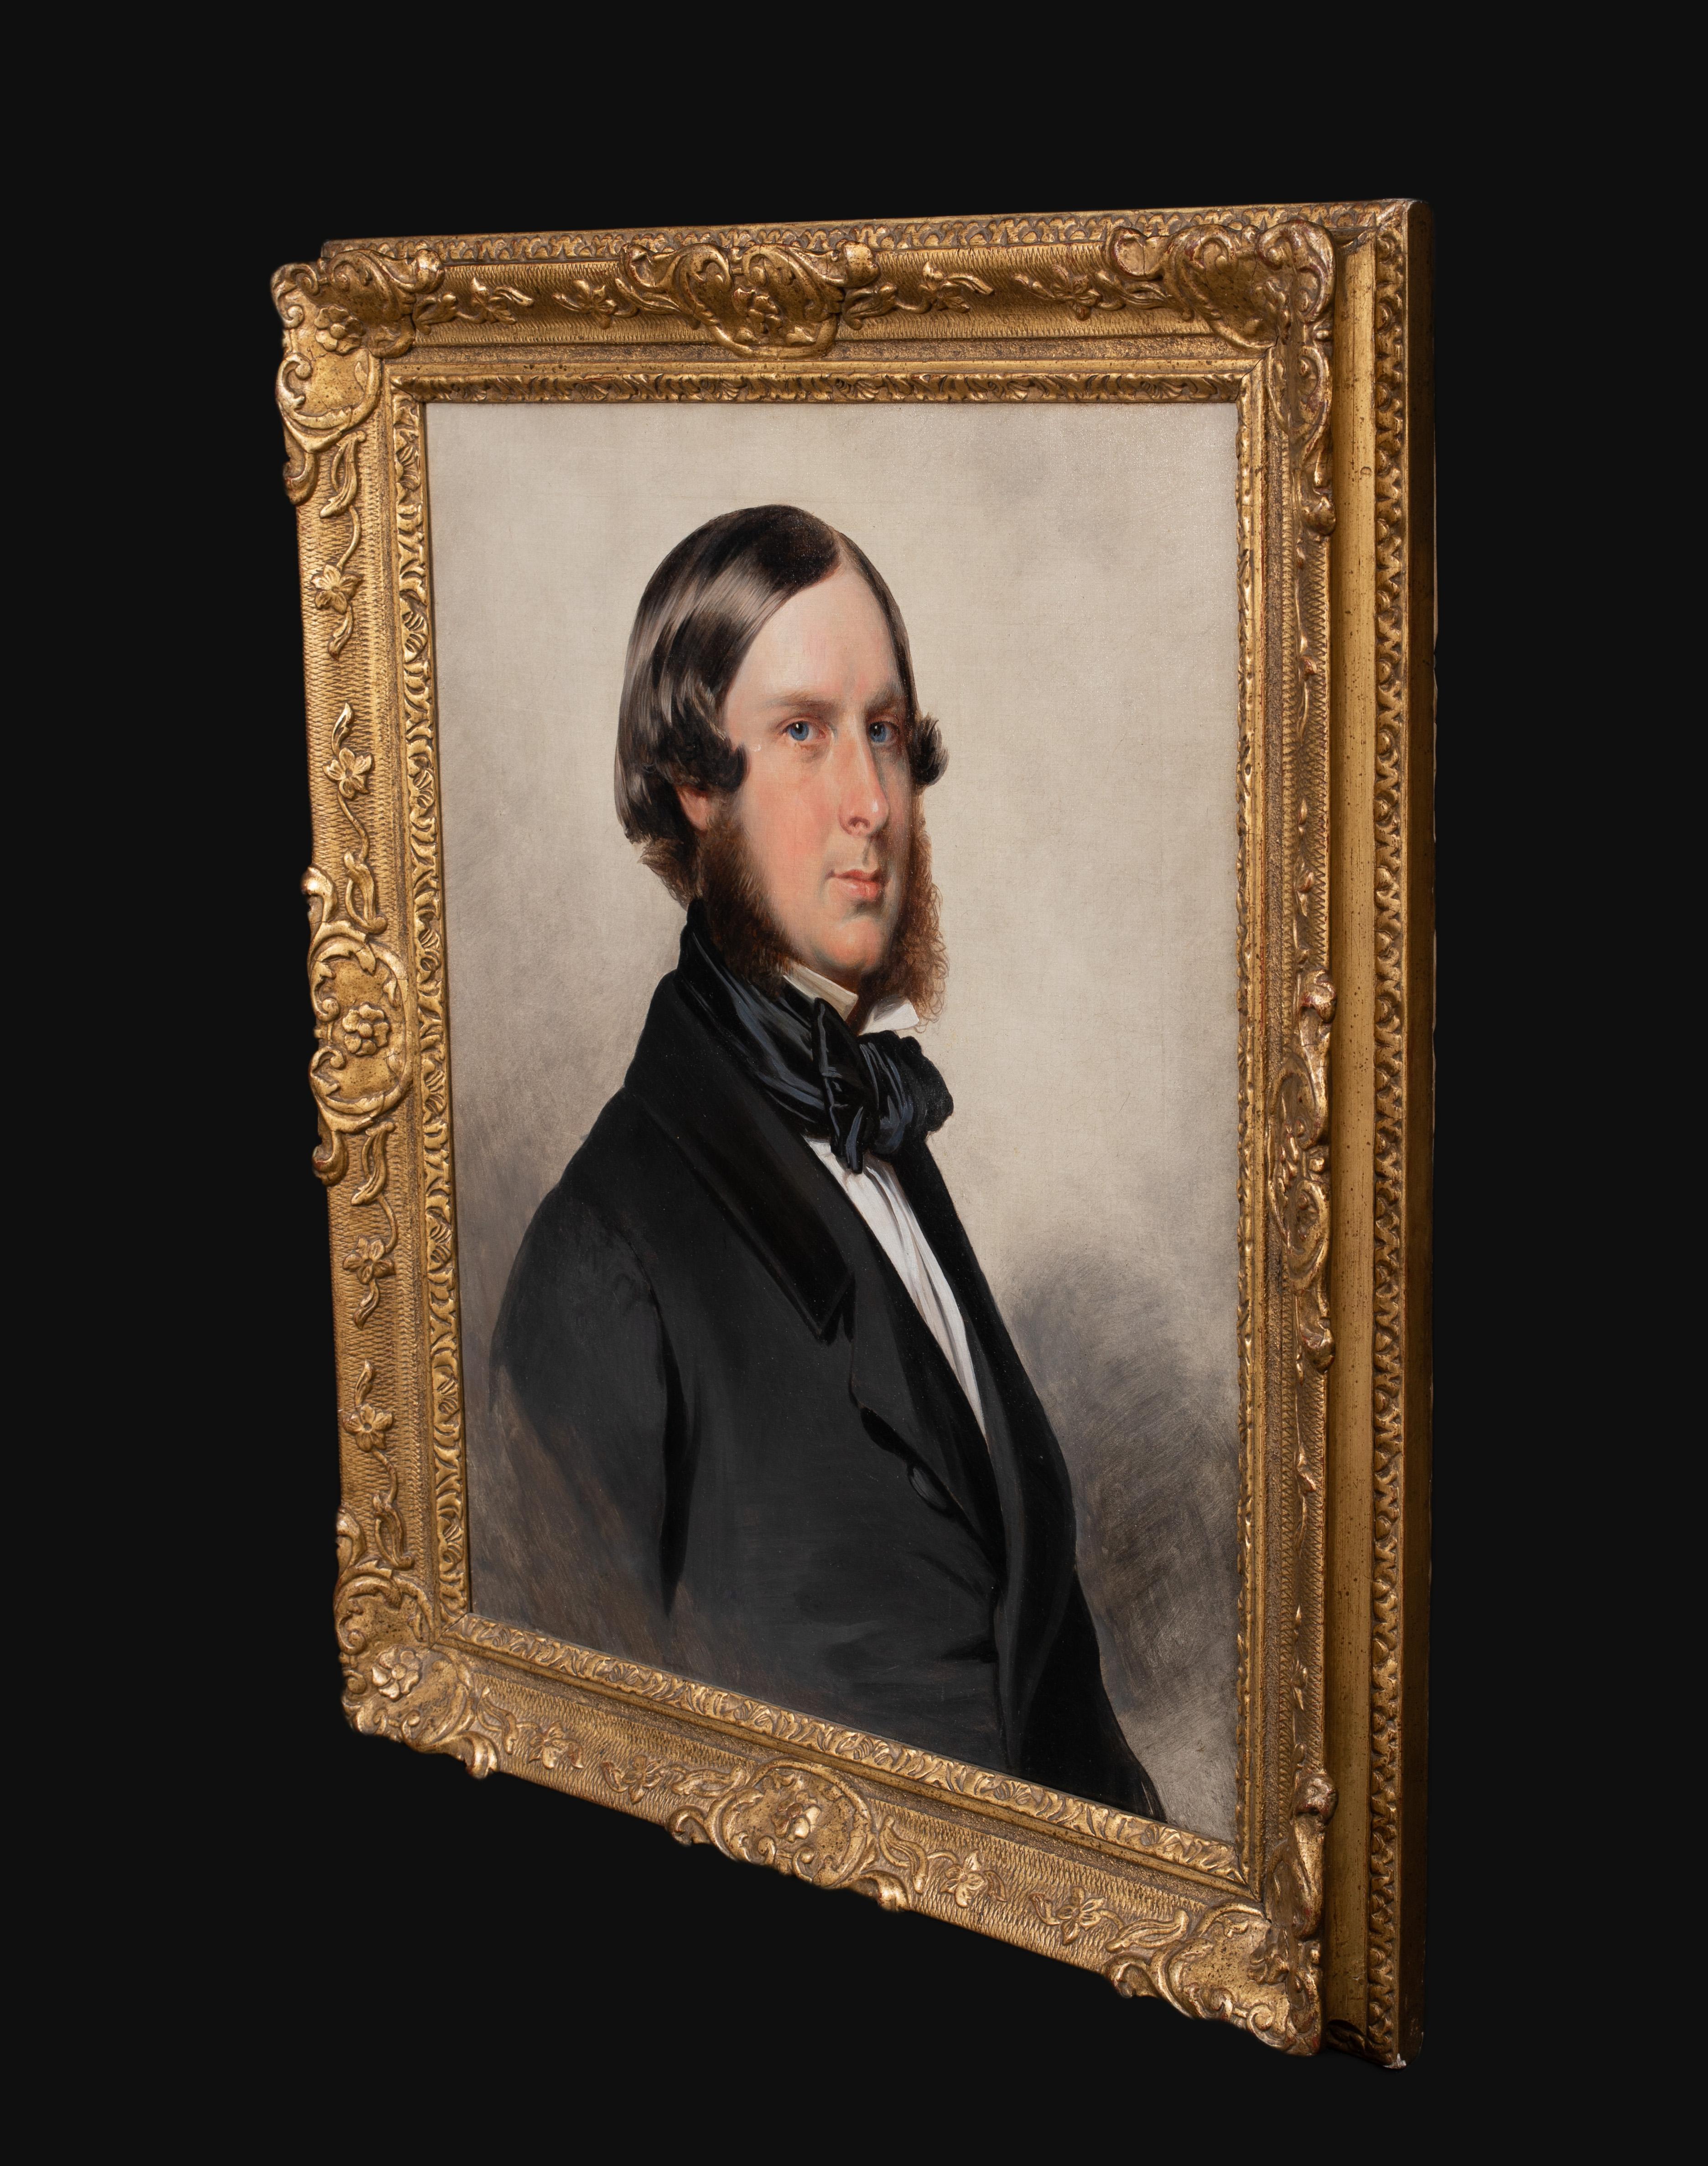 Portrait Of Prince Edward of Saxe-Weimar (1823-1902), 19th Century

school of Franz Xaver Winterhalter

Fine Large 19th Century portrait of Prince Edward of Saxe-Weimar, oil on canvas. Excellent condition and magnificent quality portrait of the